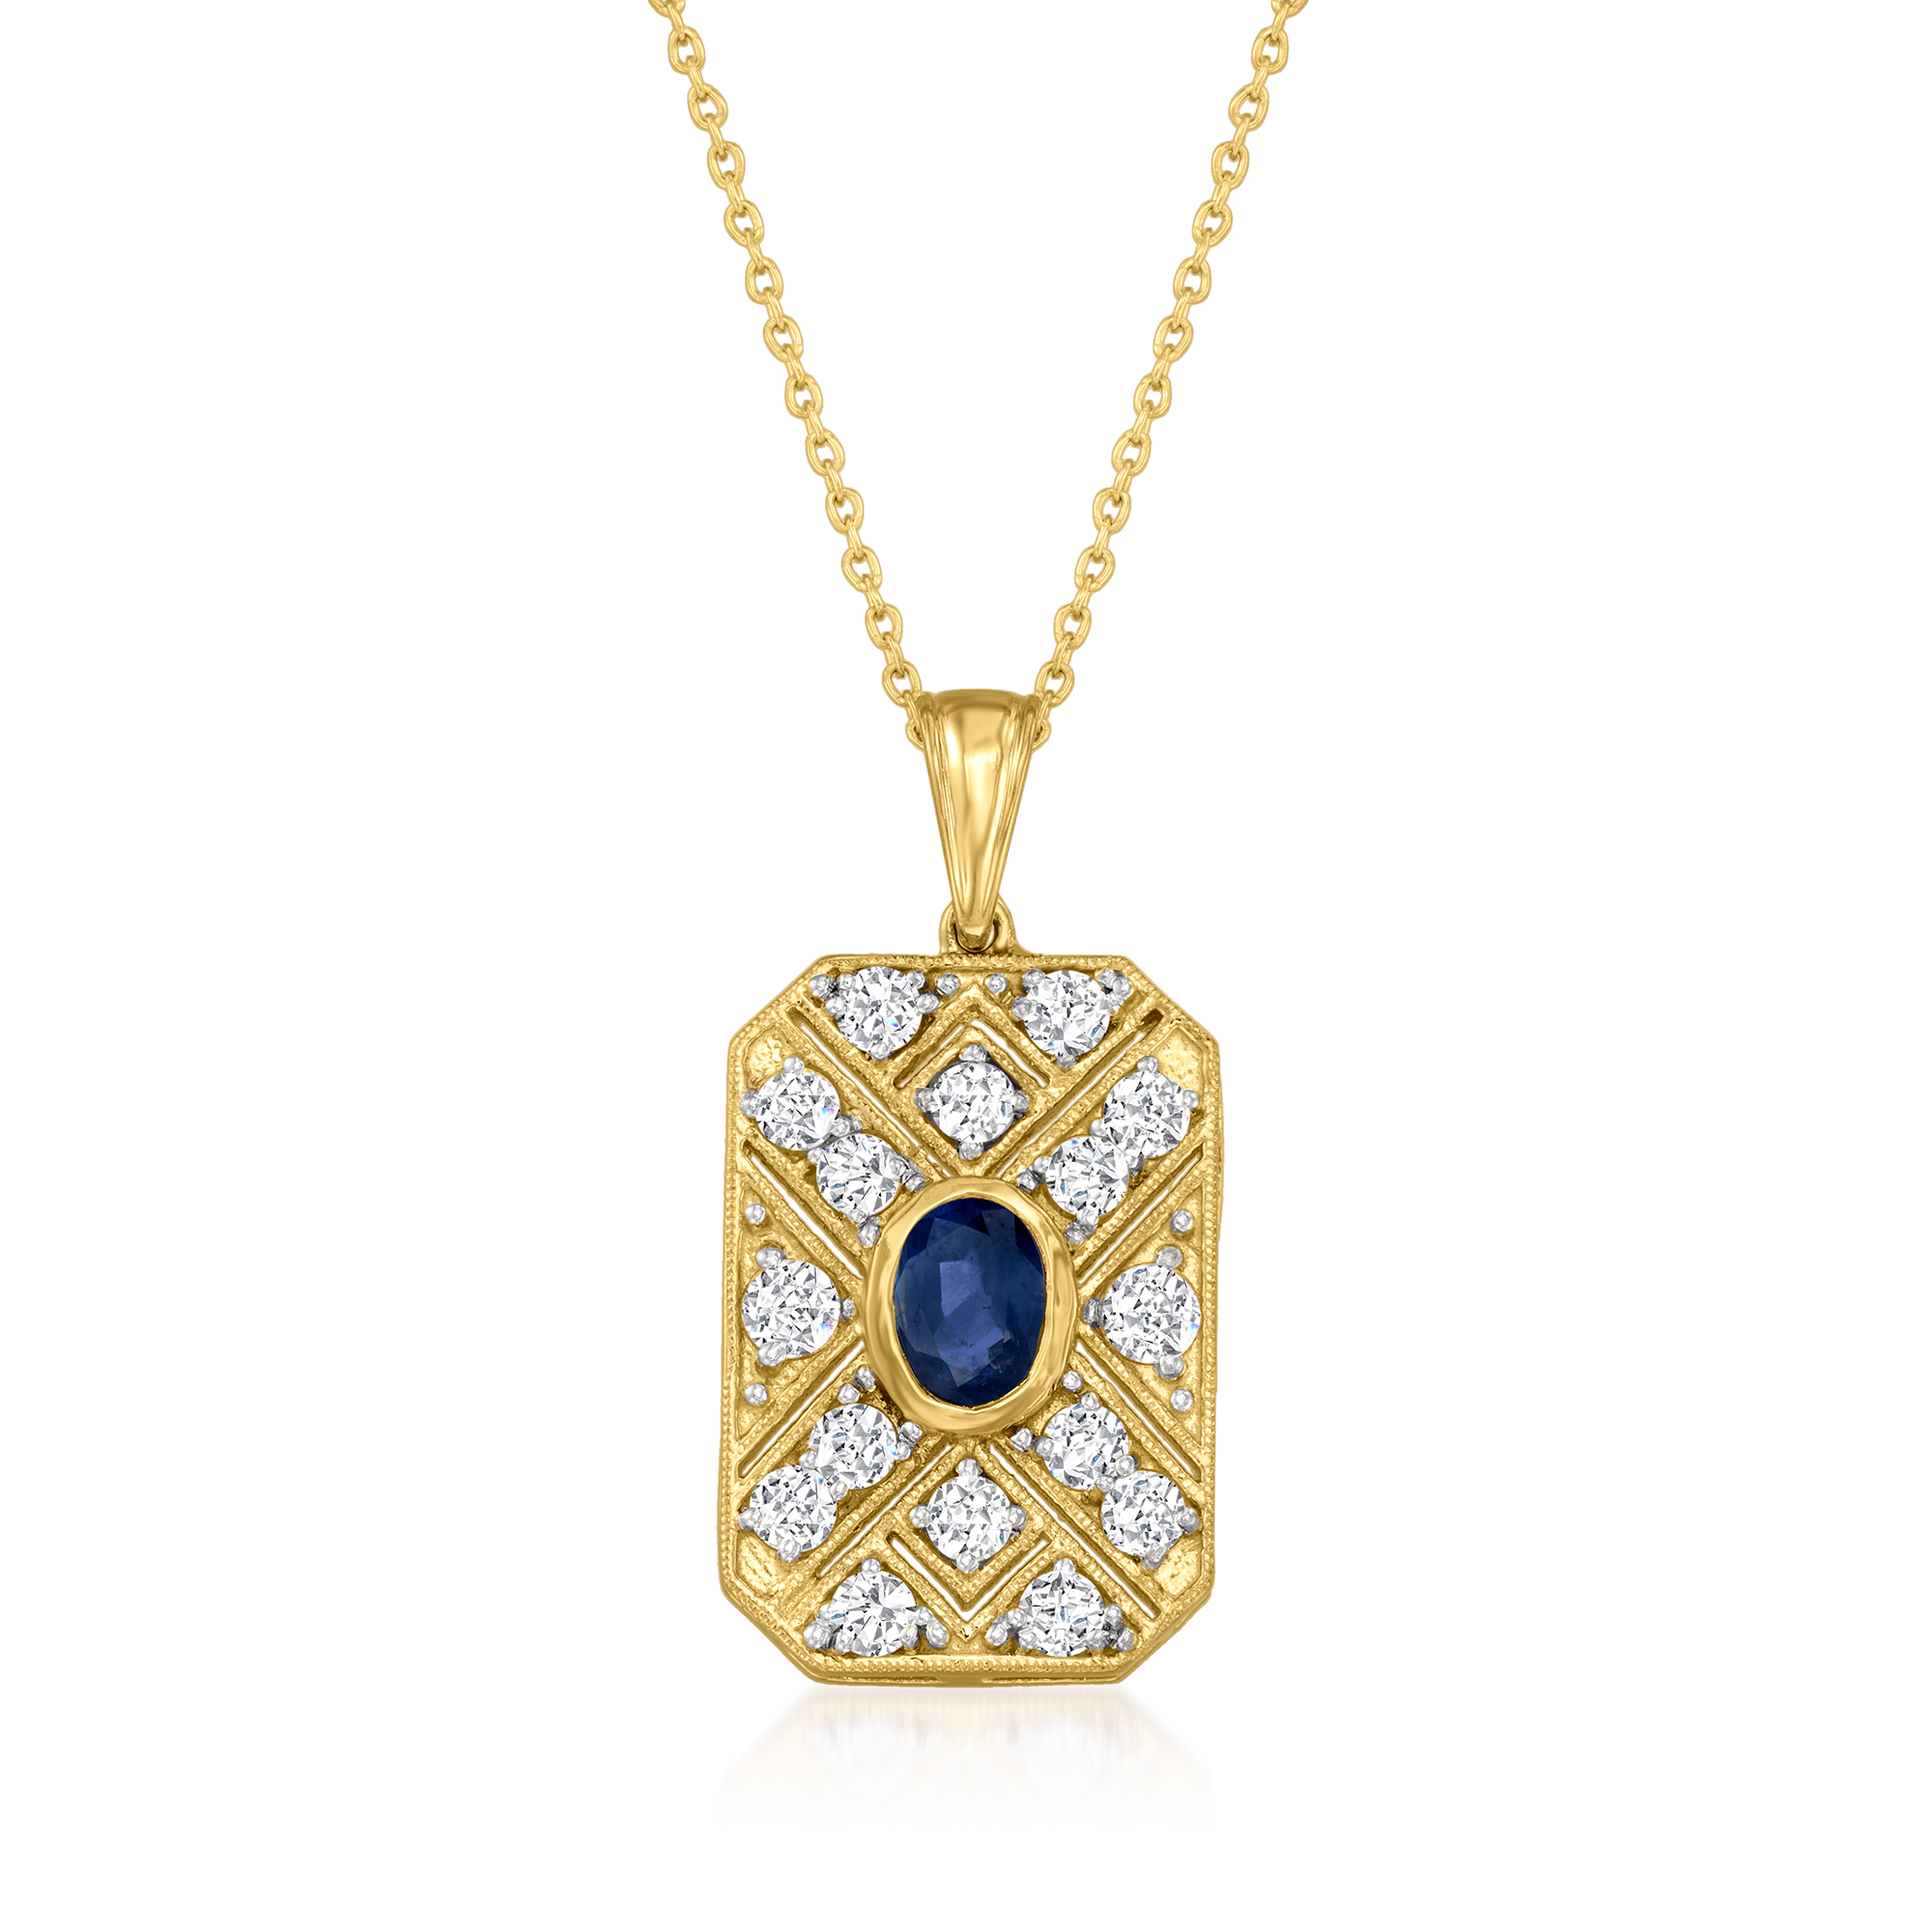 2.00 ct. t.w. White Topaz and 1.40 Carat Sapphire Pendant Necklace 